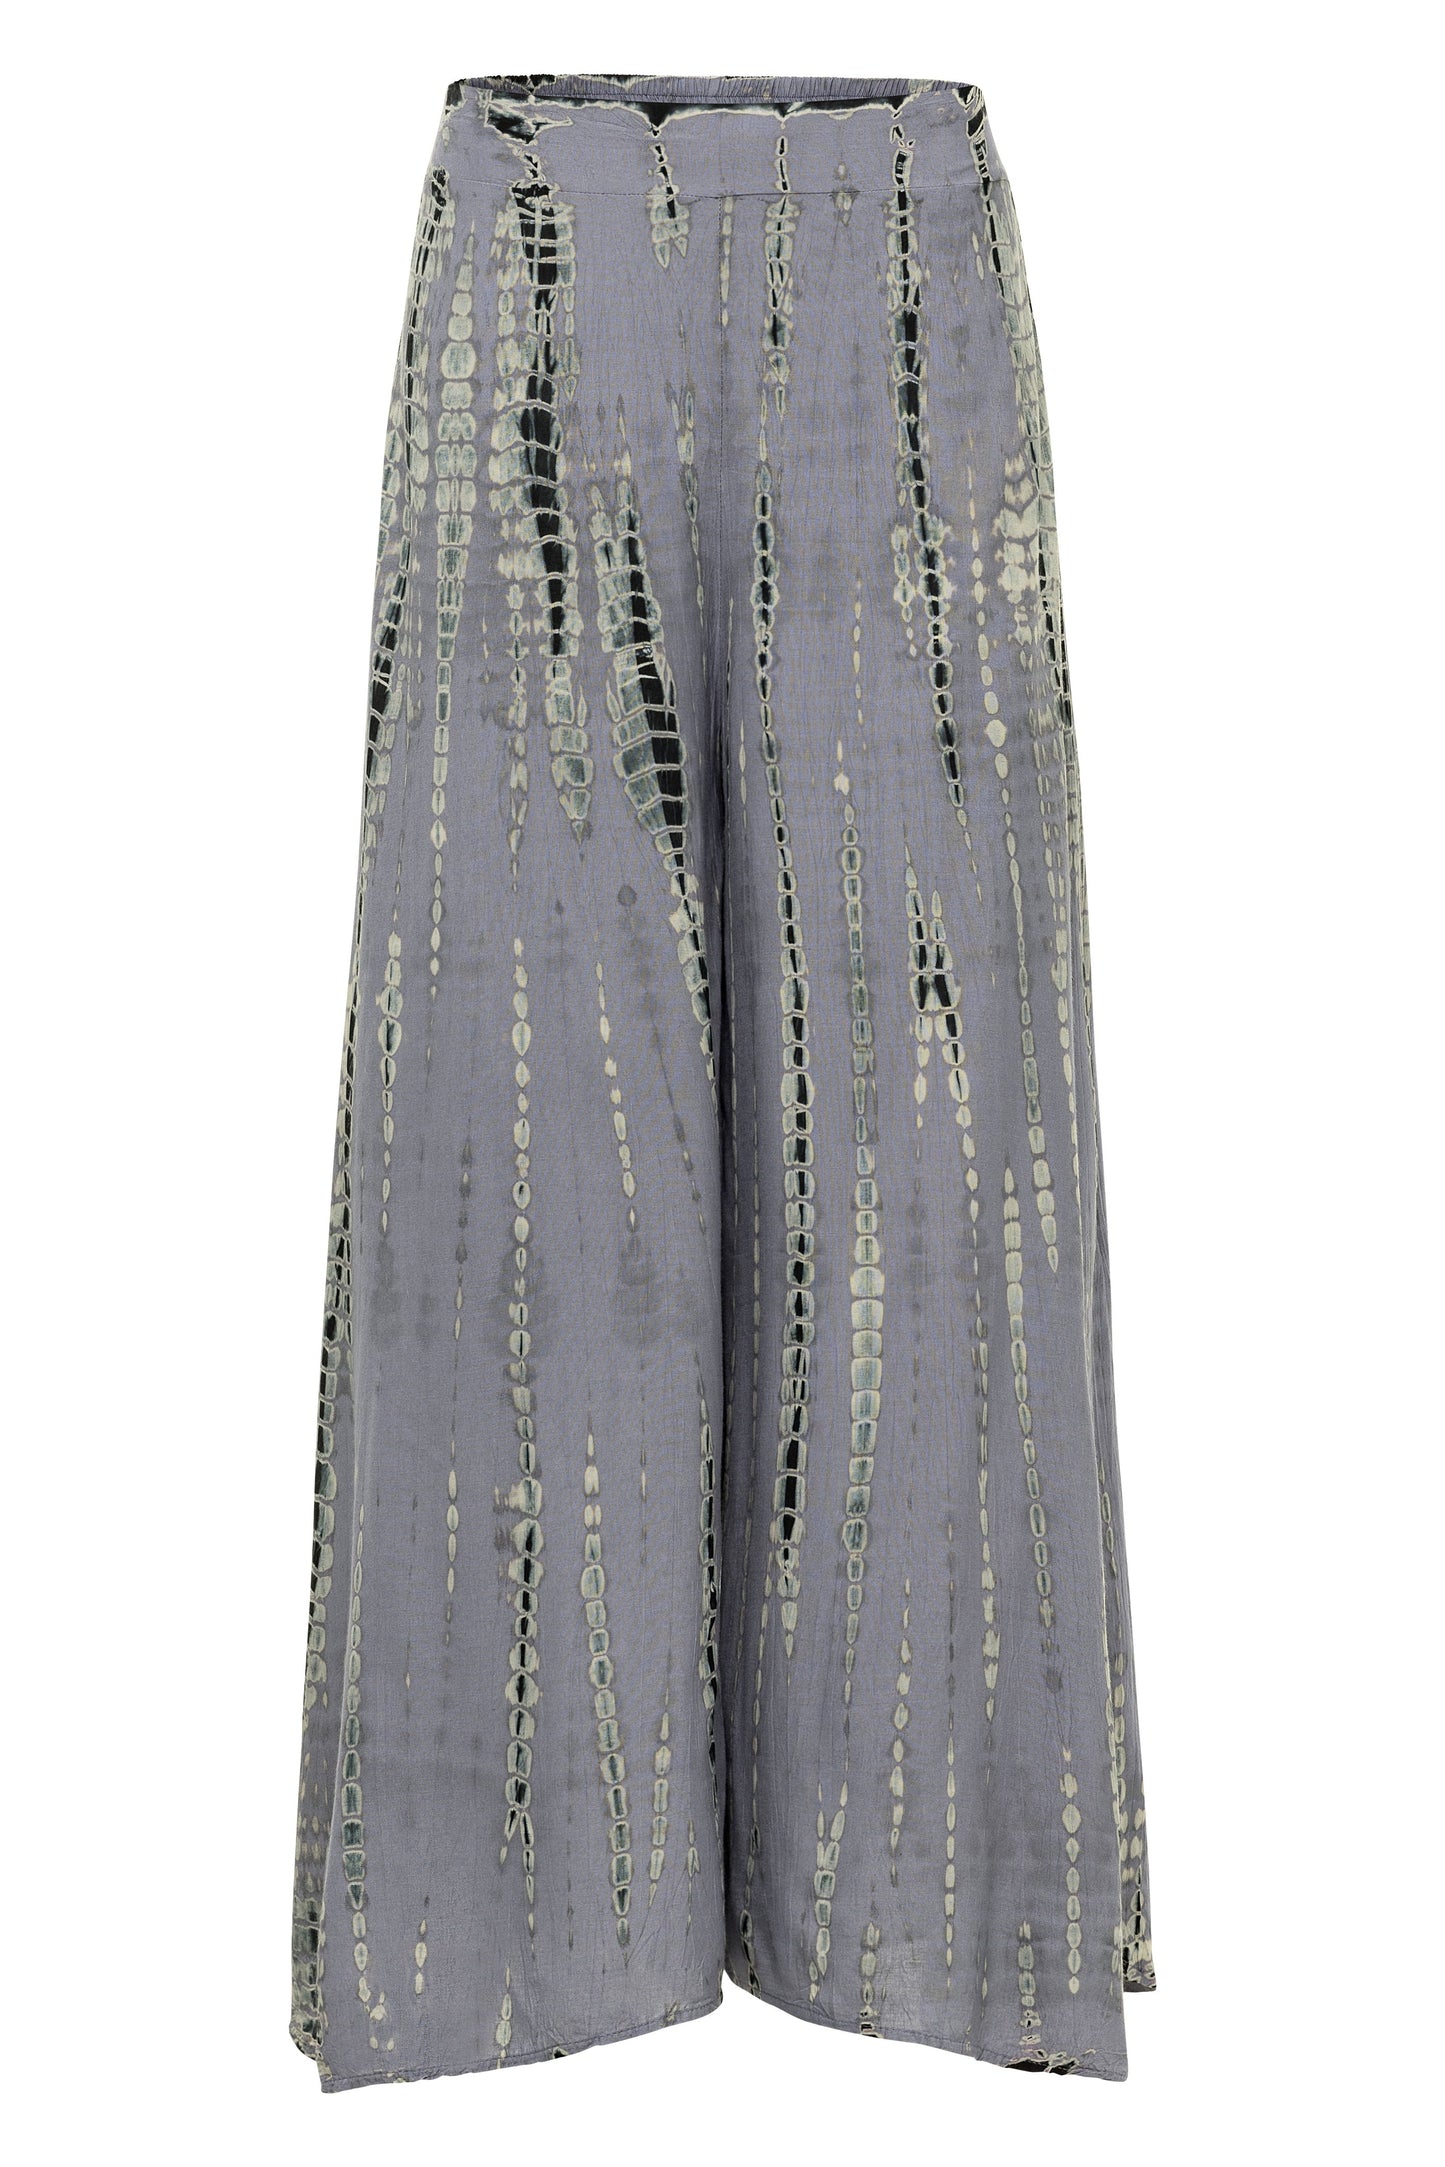 Papaya Tree Imports Luxe Wide Leg All Over Tie Dye Flow Pant Lilac